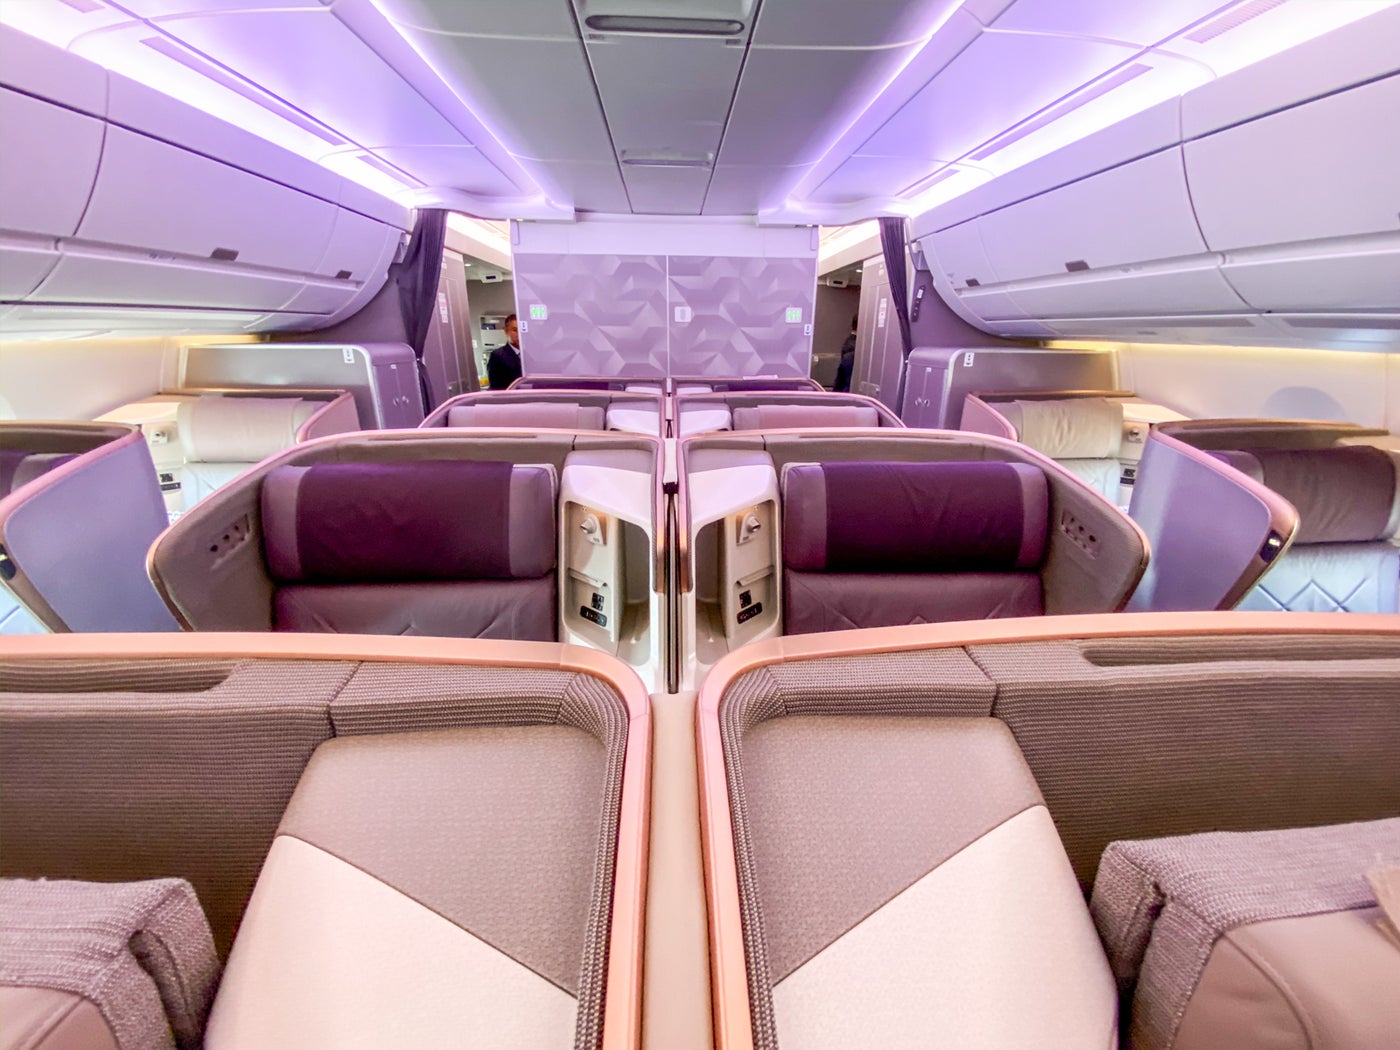 Review Singapore's A350 business class on the world's longest flight